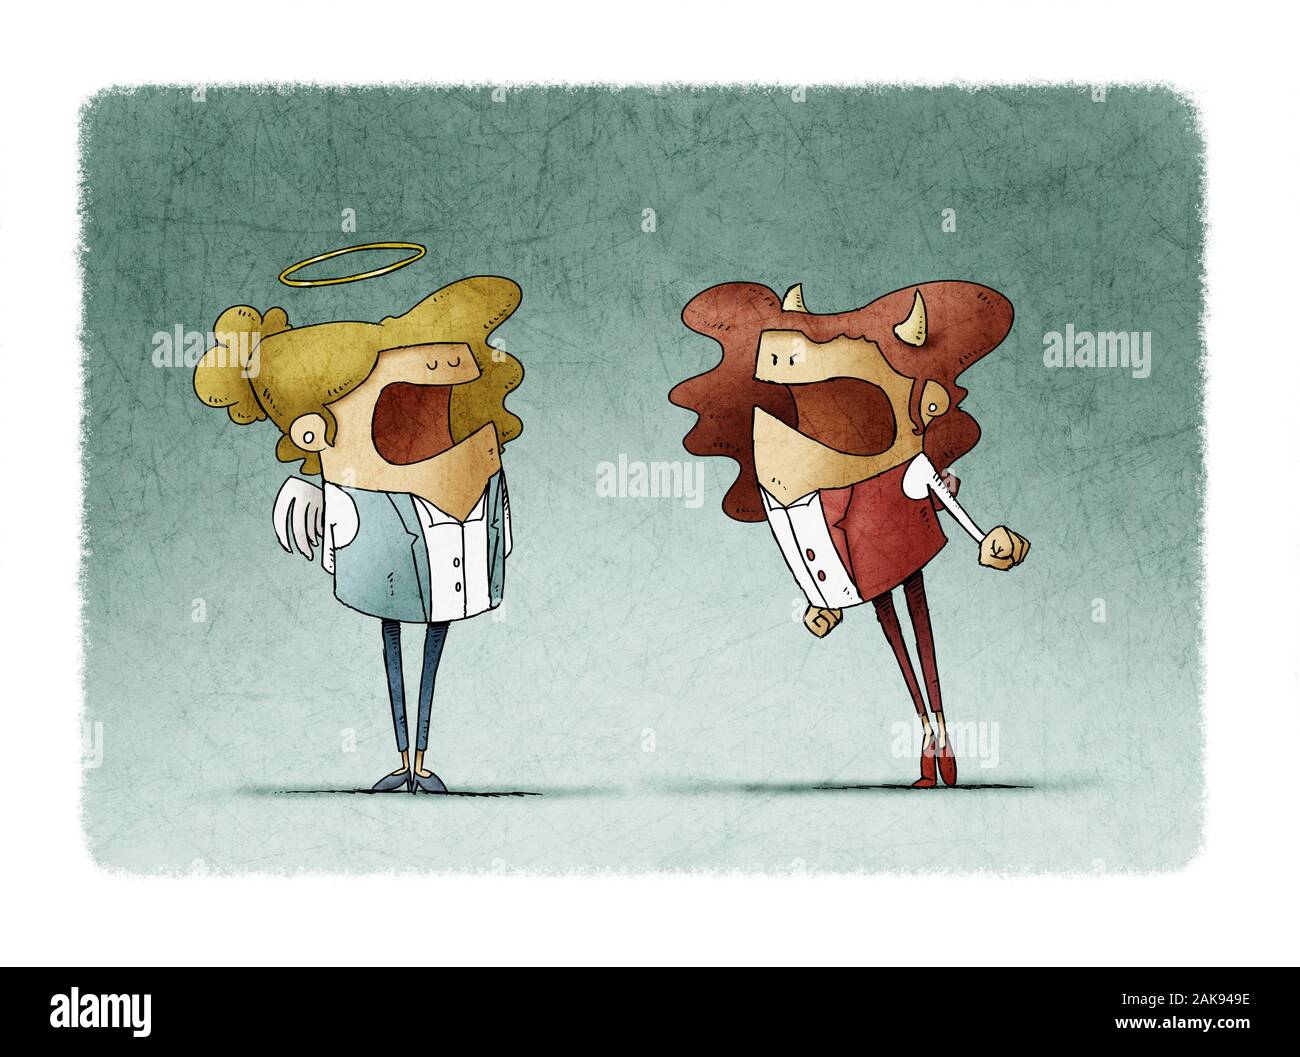 Female gender angel and devil are arguing. The devil is angry and the angel is calm. Stock Photo